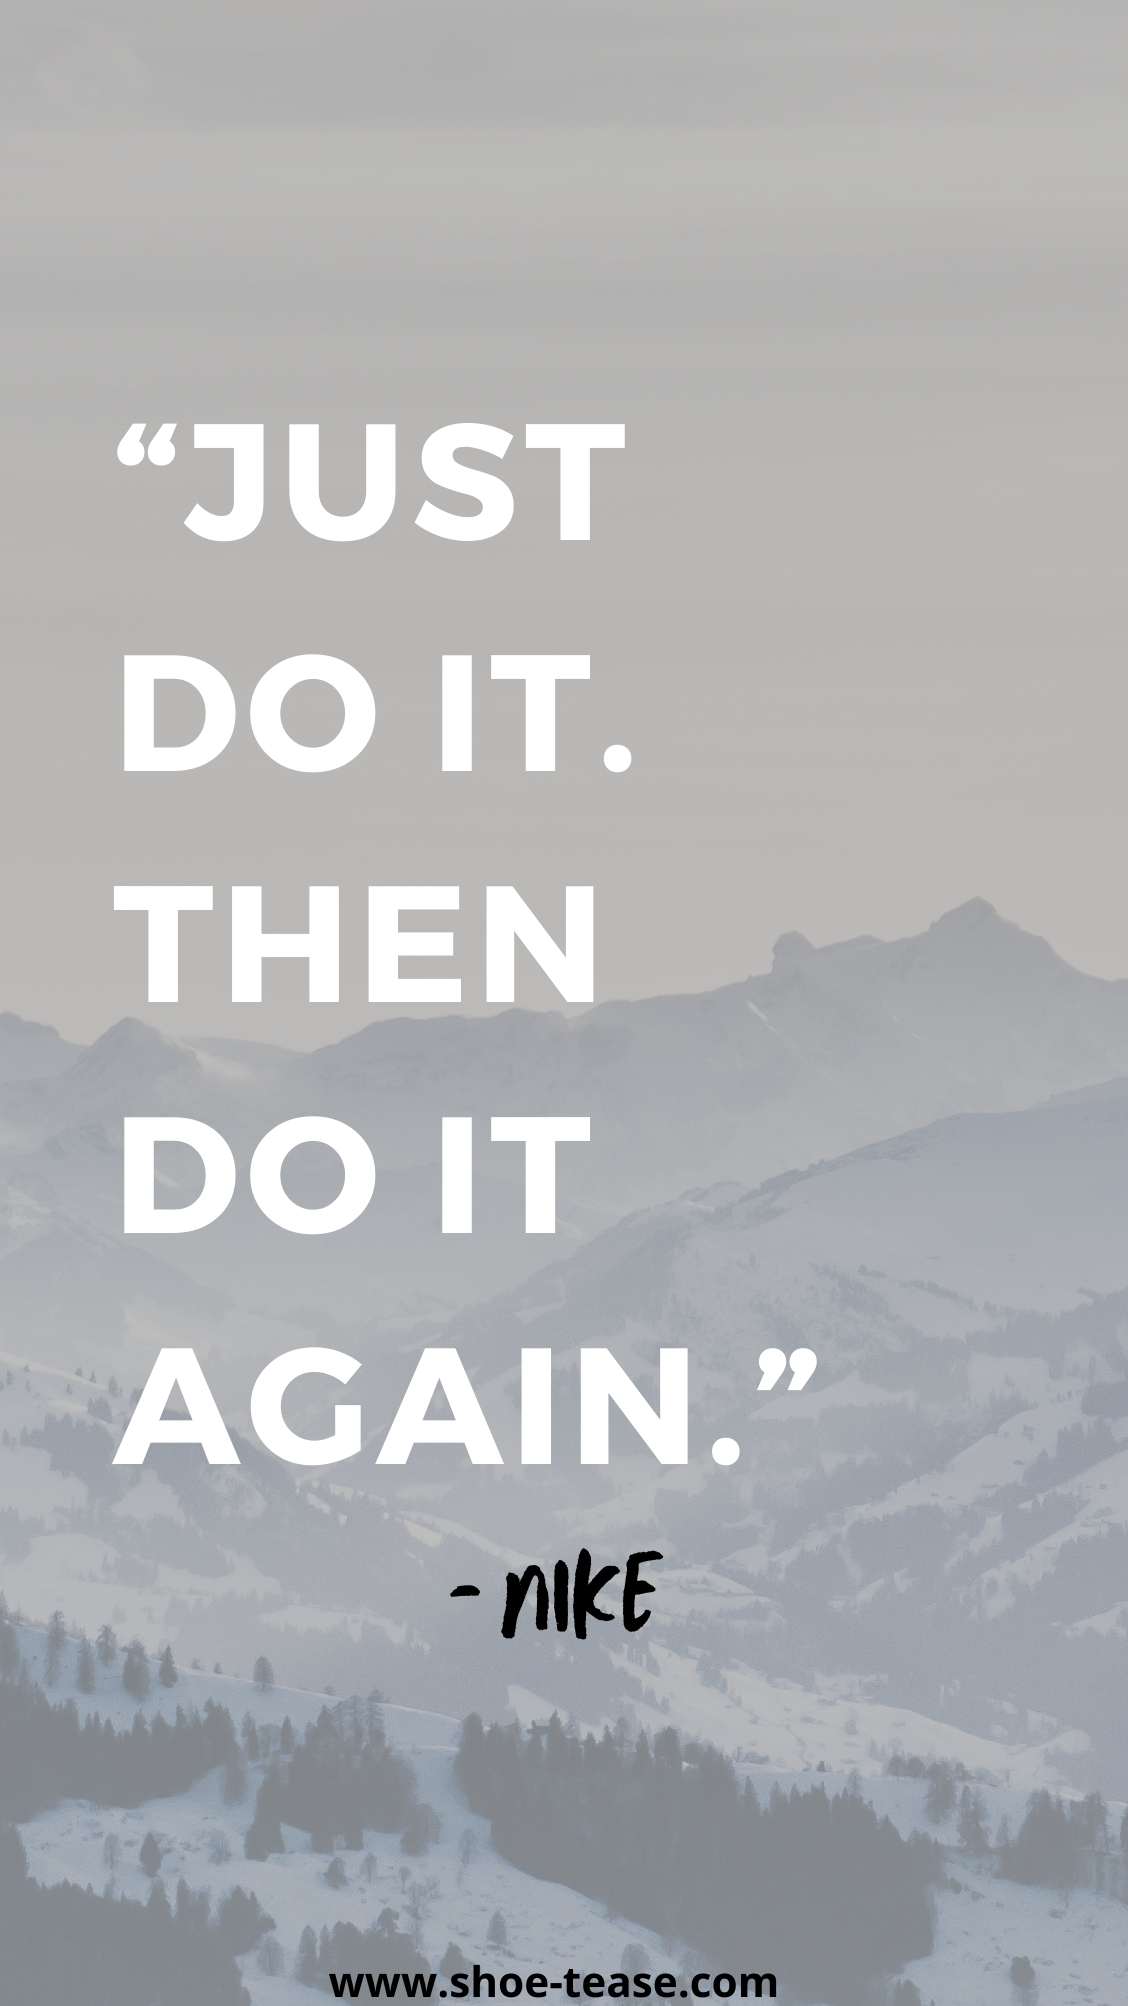 Nike Quote reading Just do it. Then do it again over winter mountains landscape.